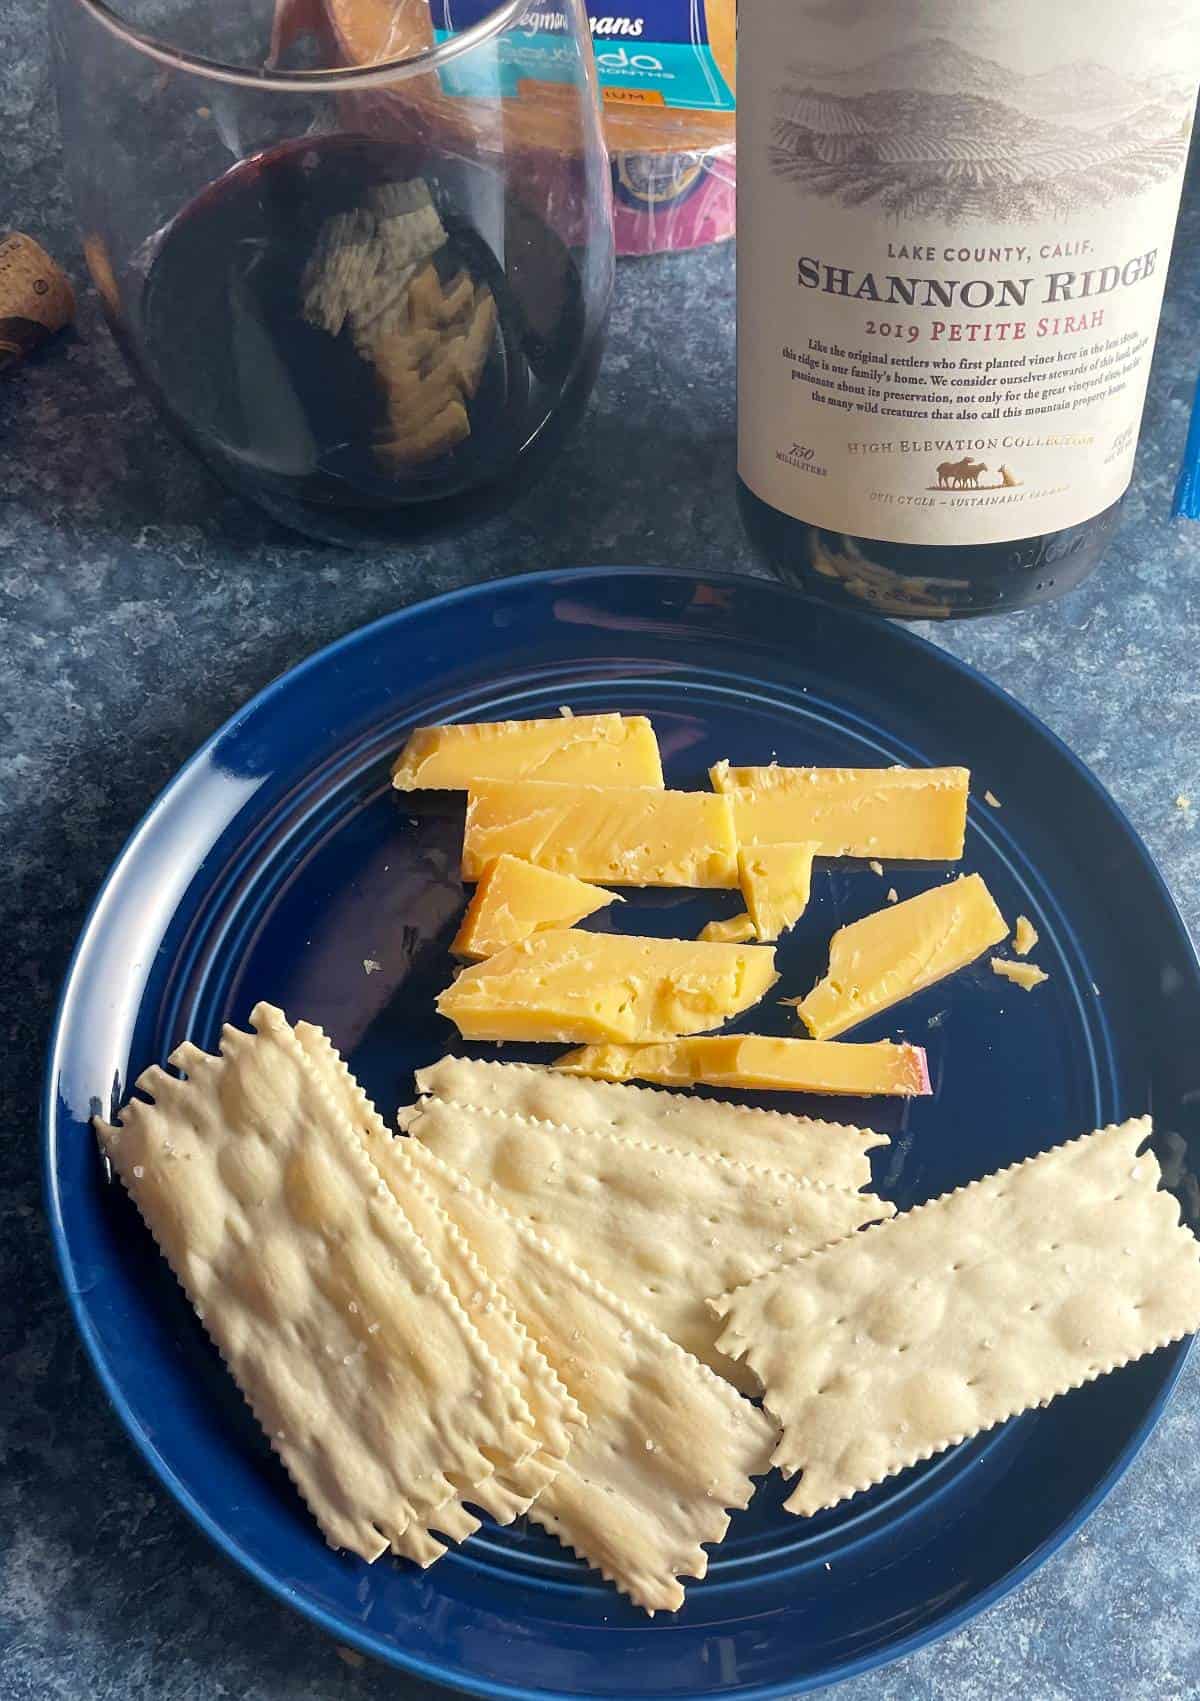 Gouda cheese on a blue plate with crackers, paired with a Petite Sirah red wine.